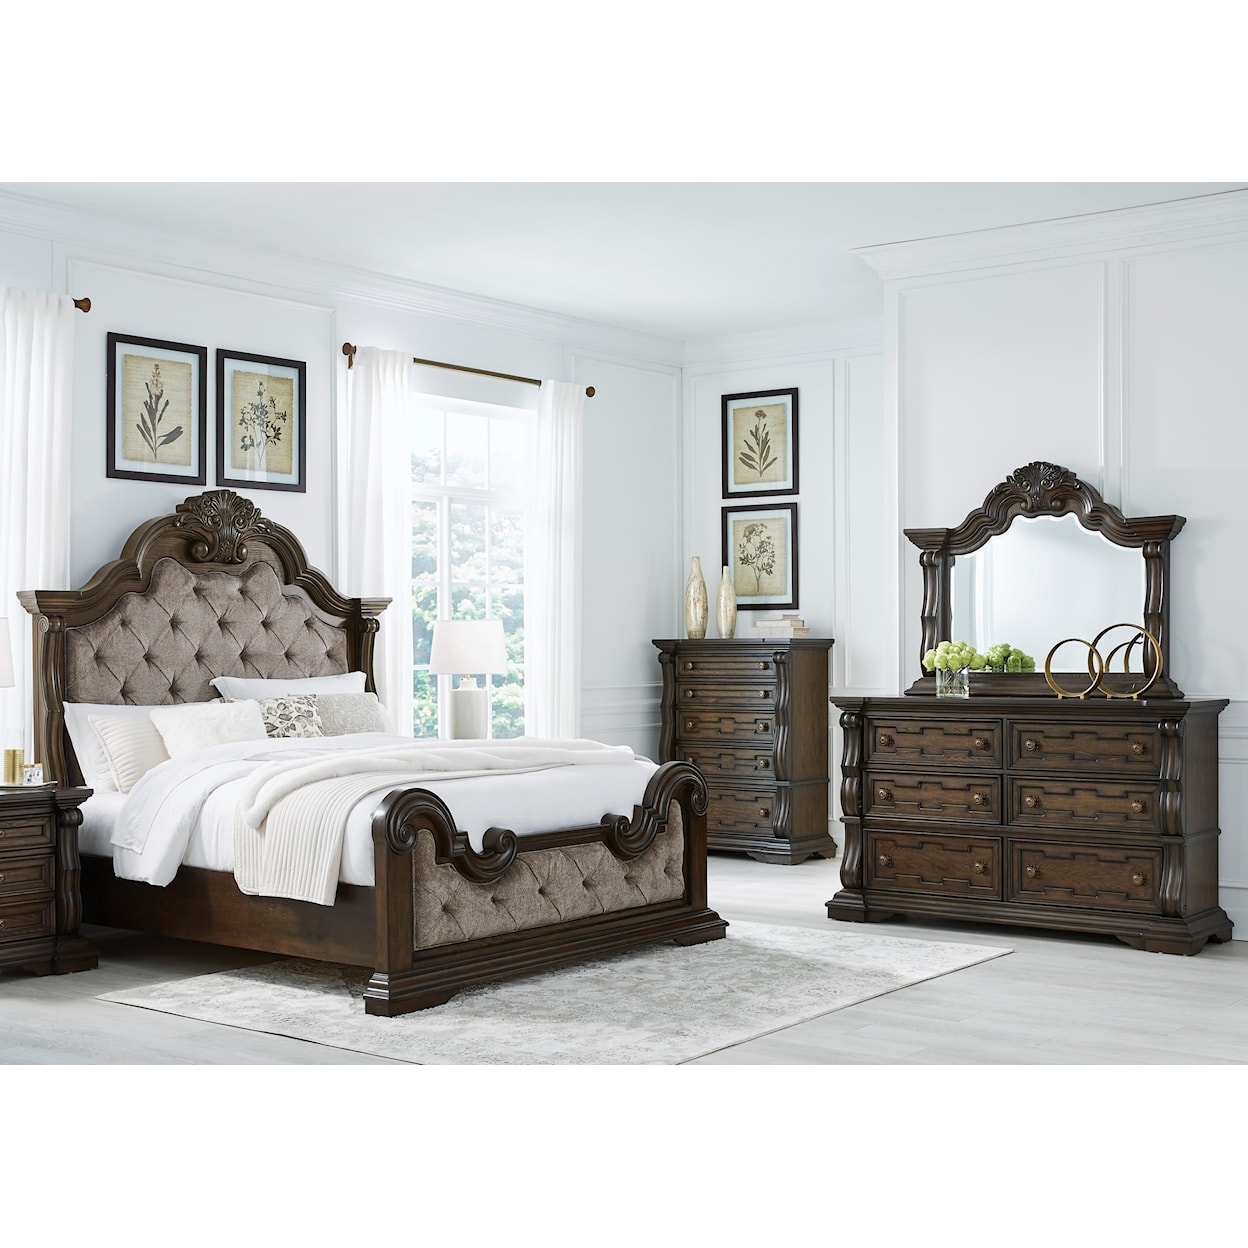 Signature Design by Ashley Maylee King Bedroom Set